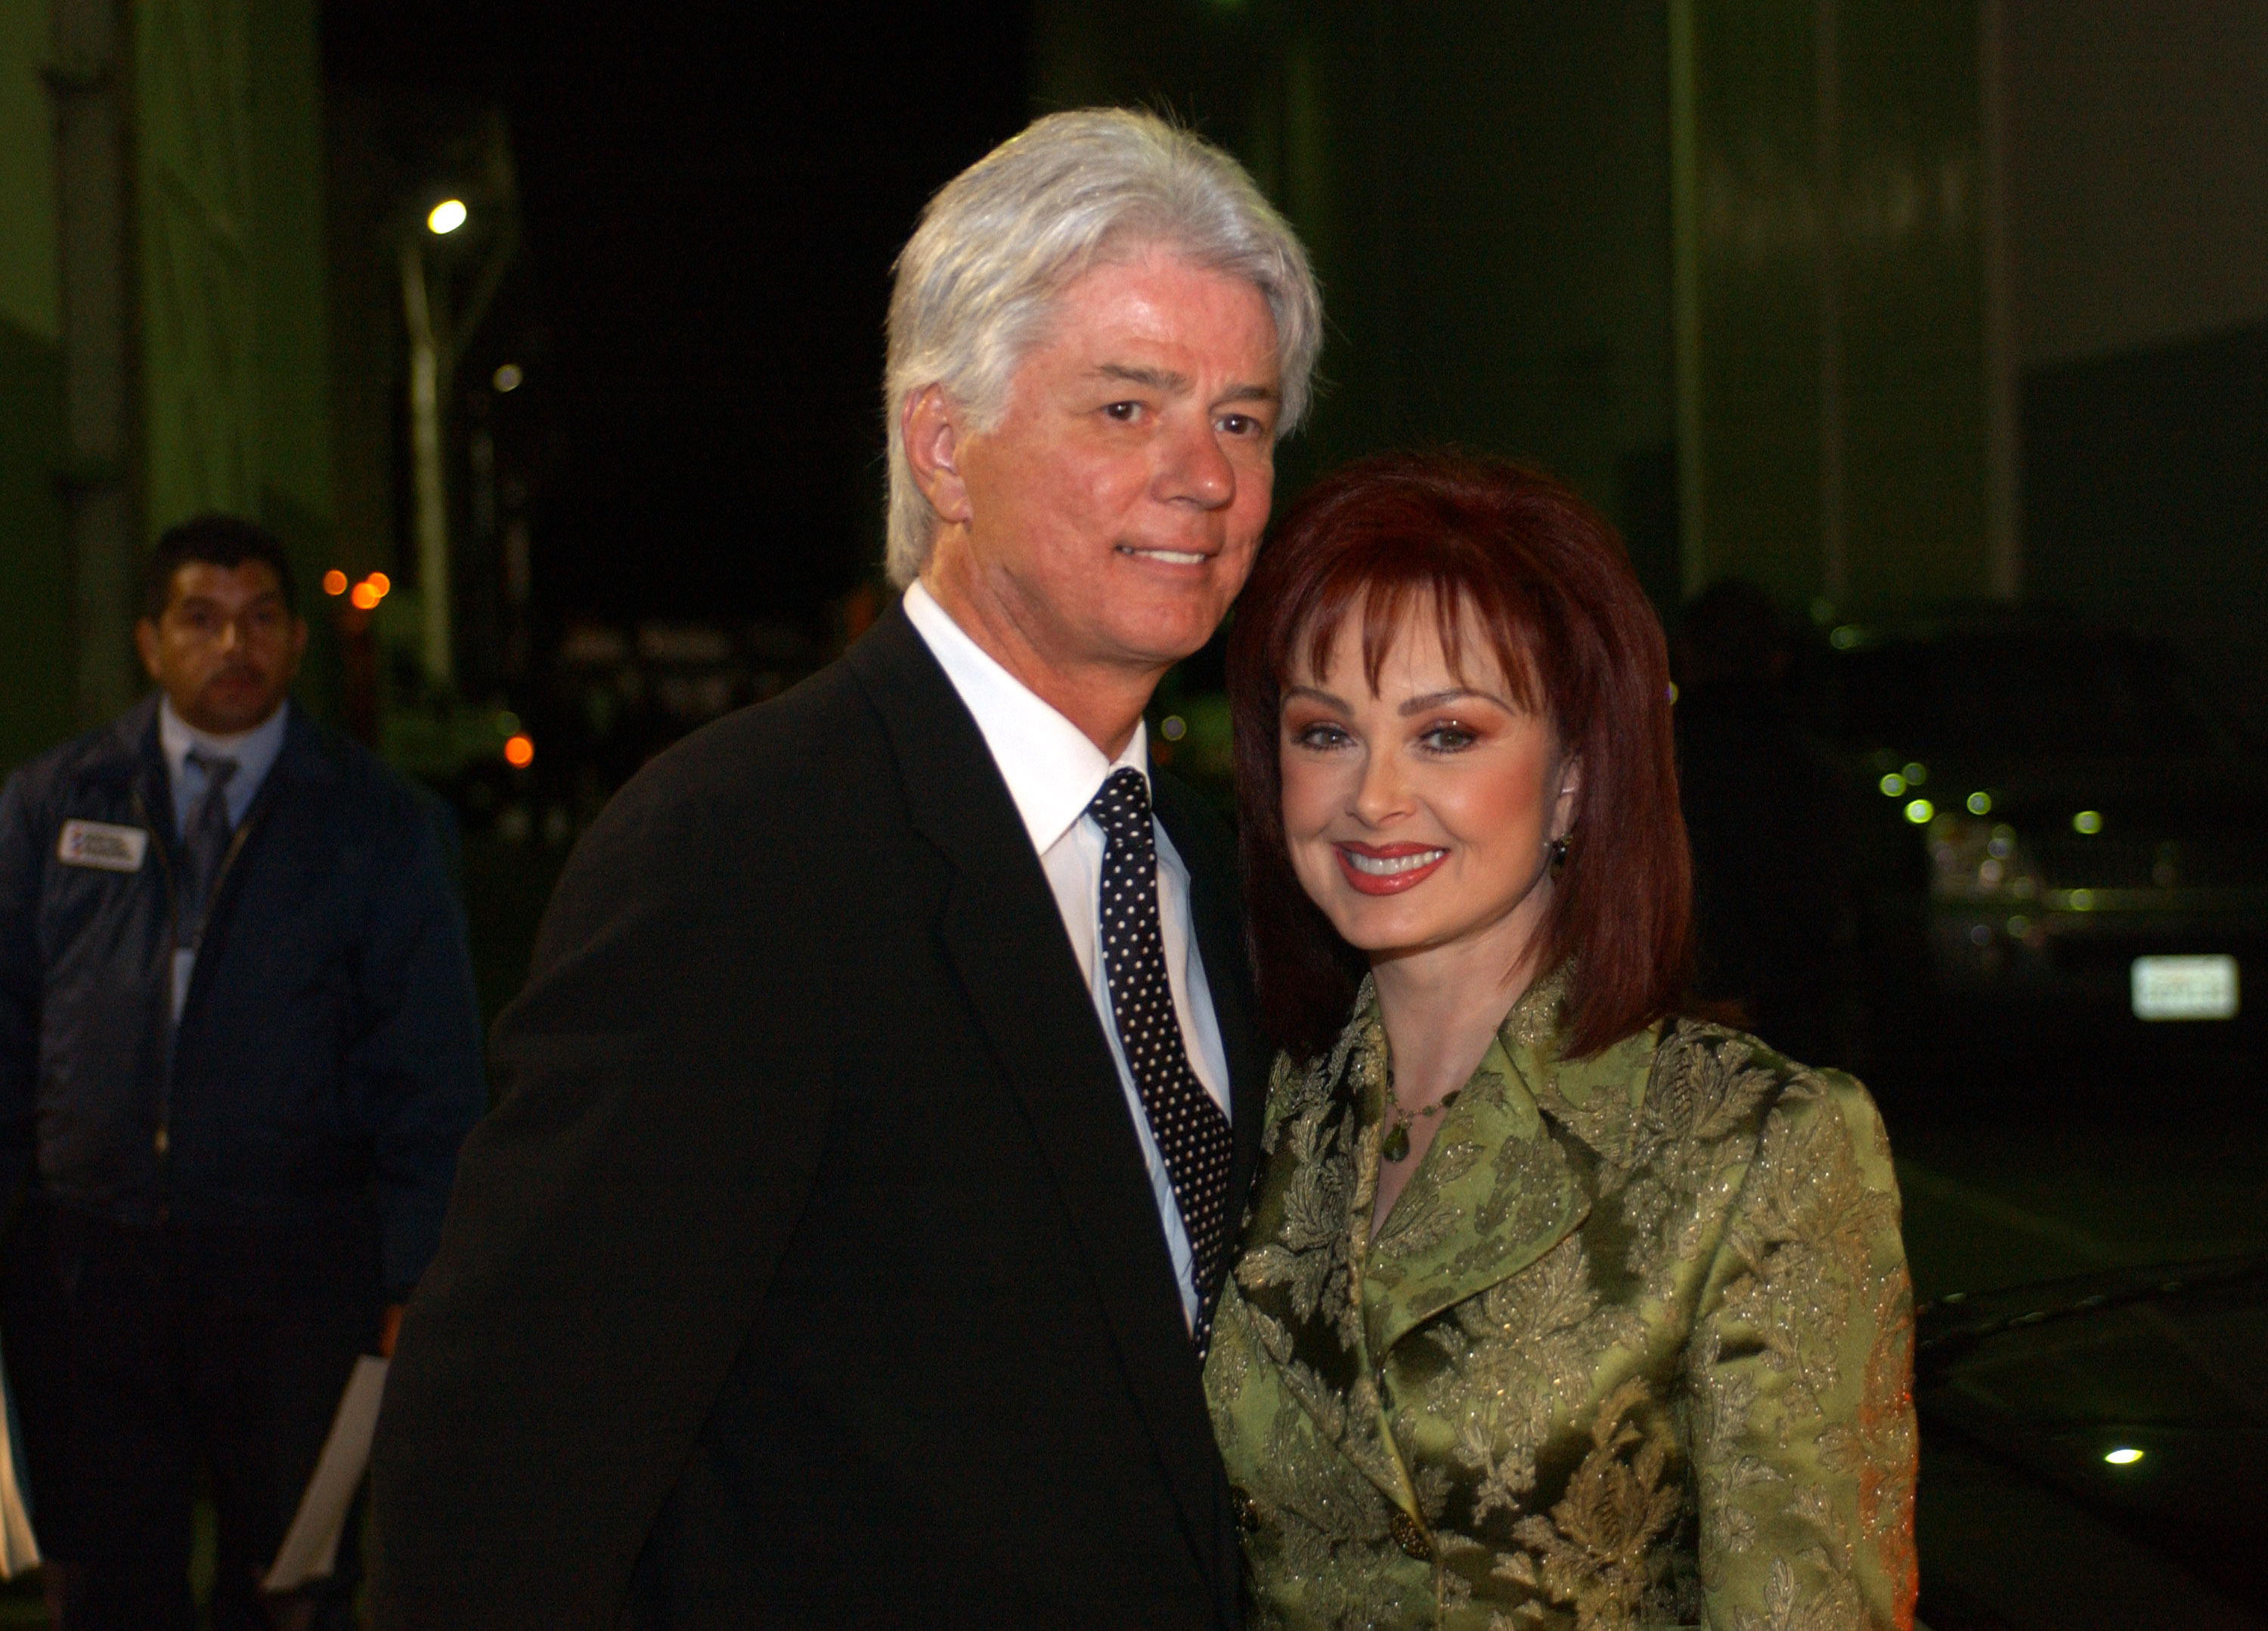 Naomi Judd and Larry Strickland in Los Angeles, California on February 8, 2004 | Source: Getty Images